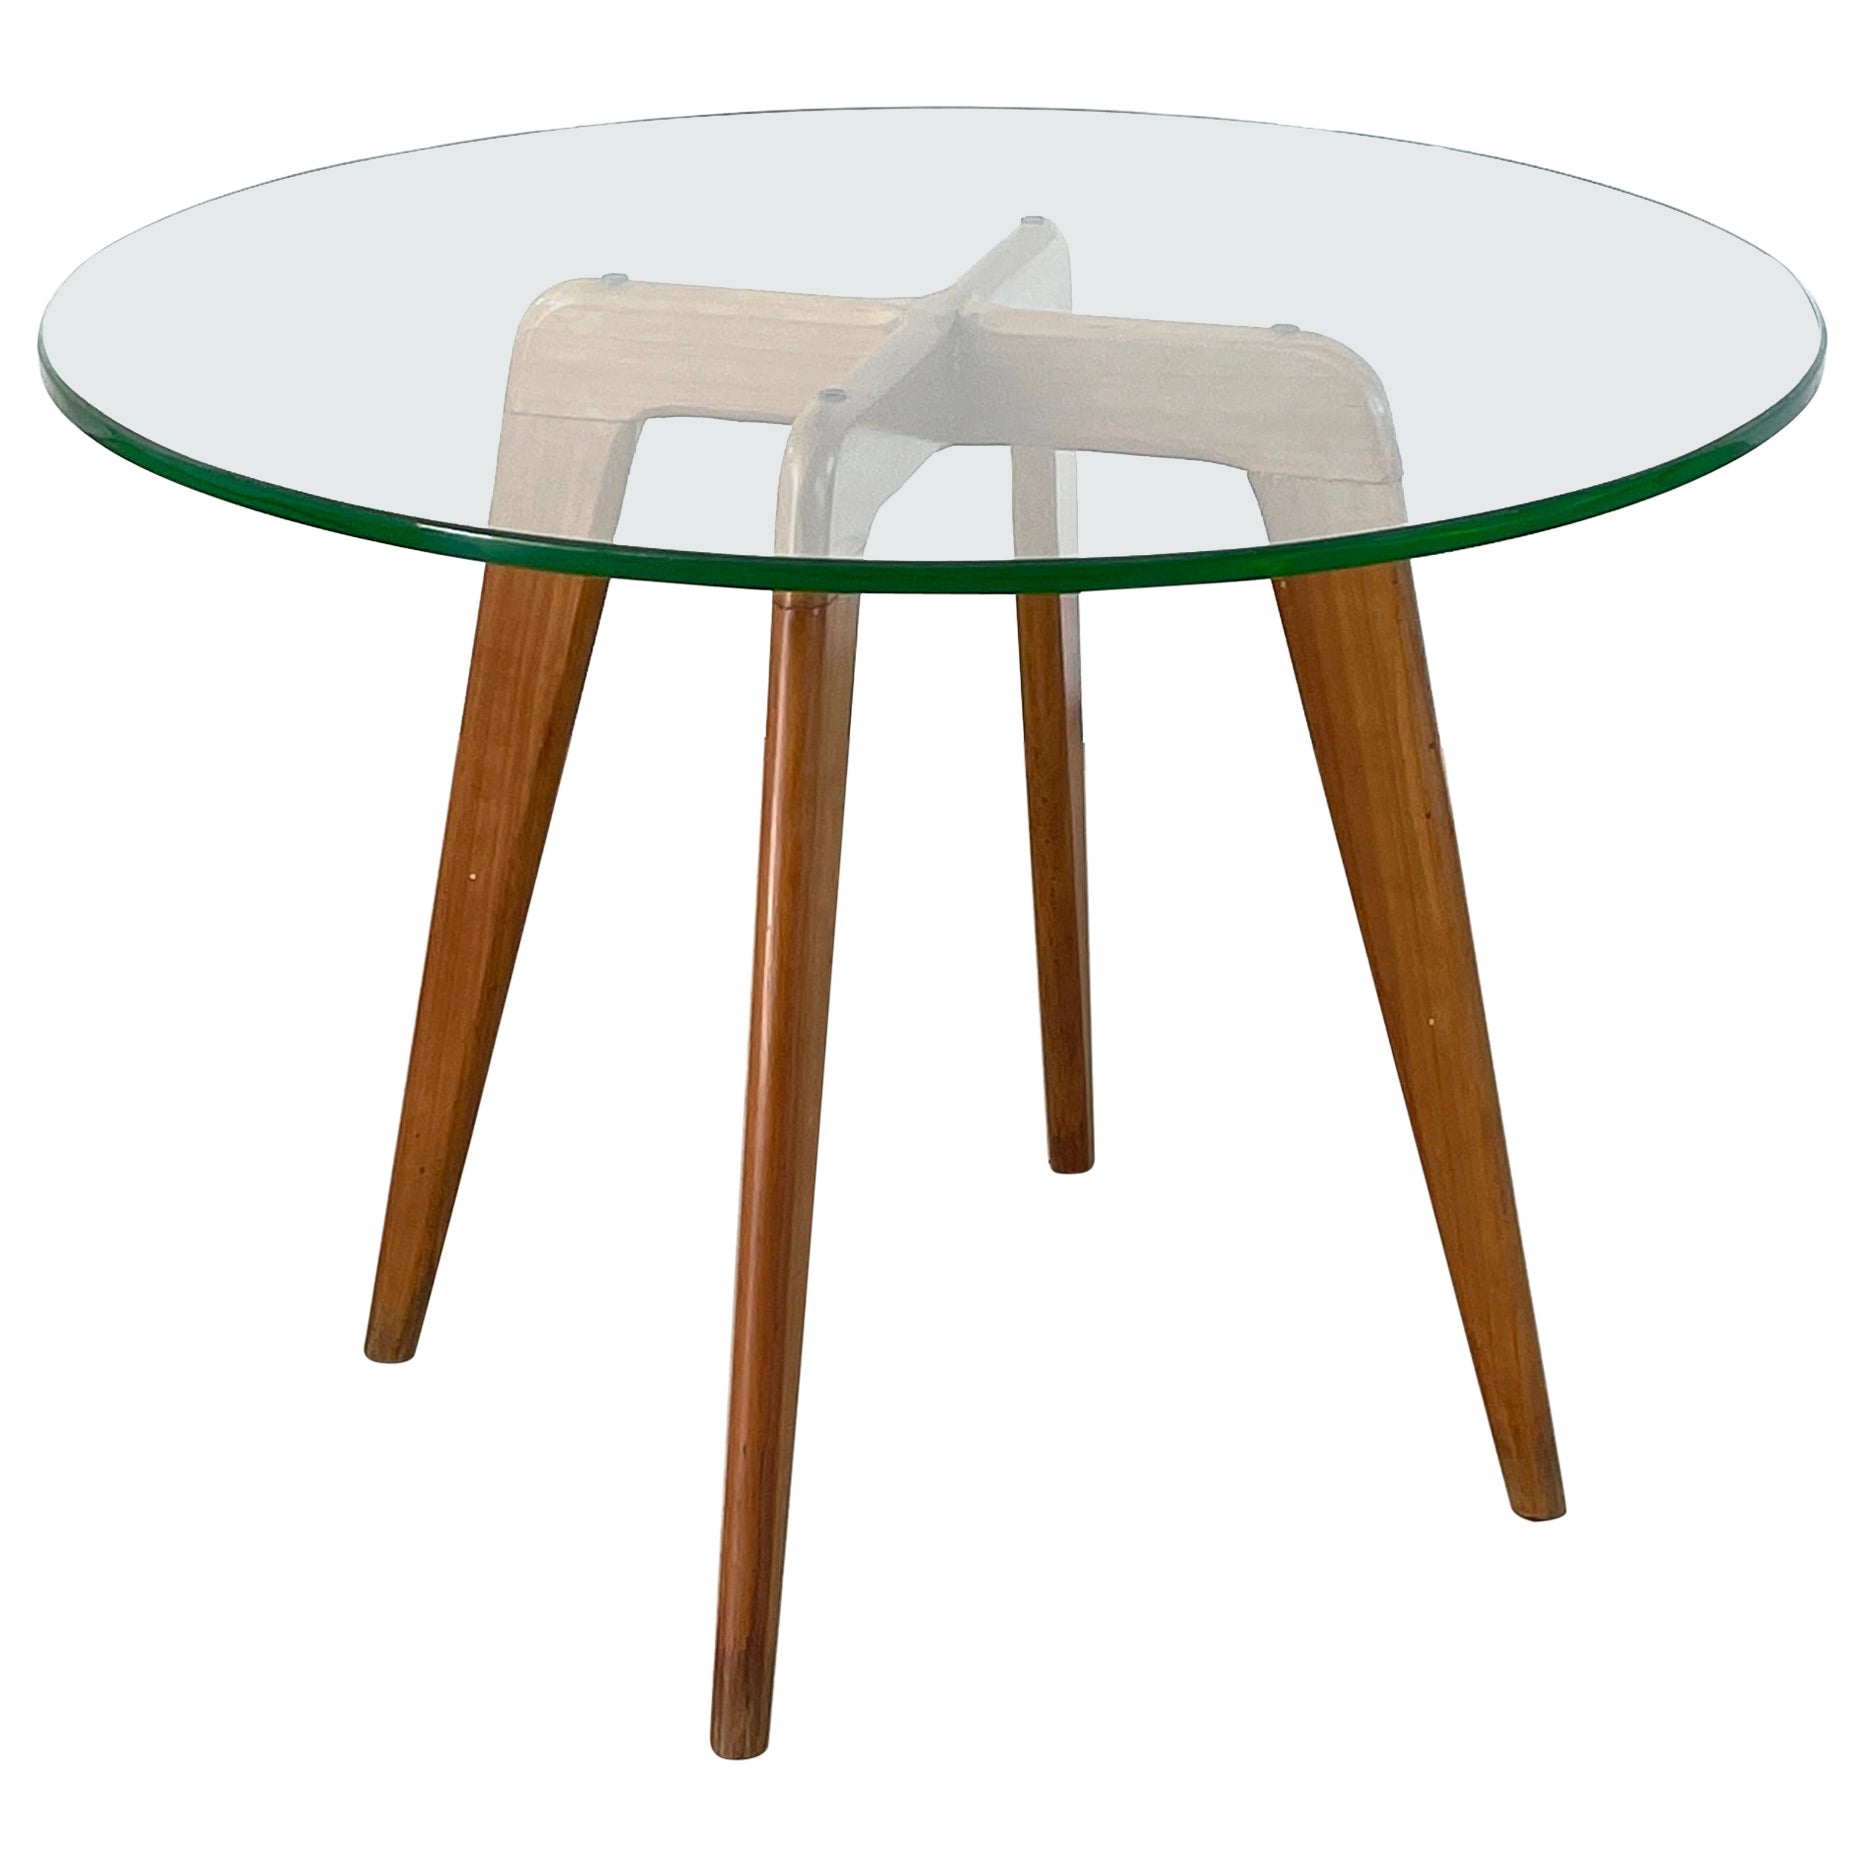 Italian Side Table For Sale